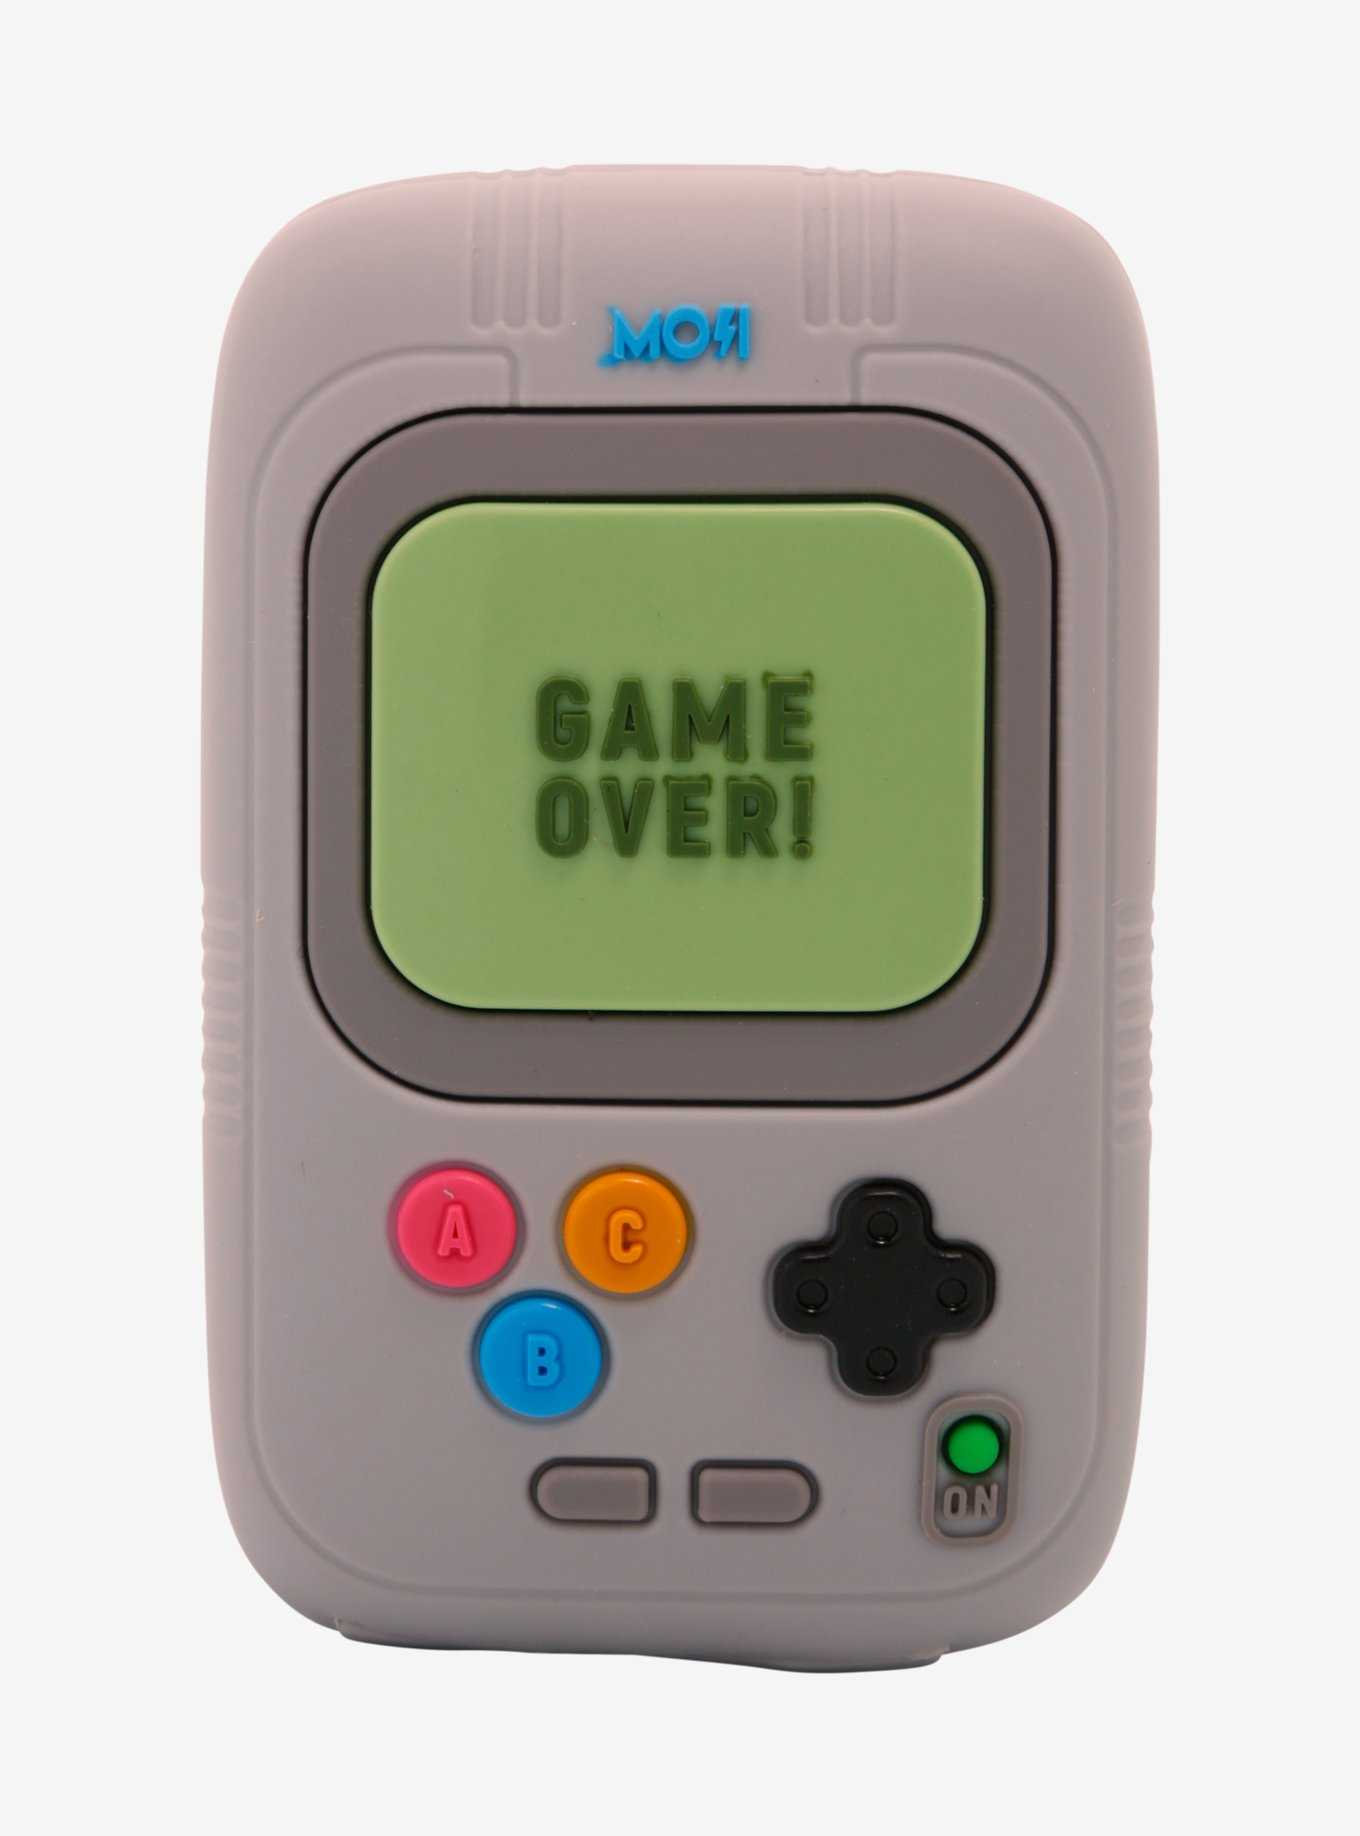 Mojipower Game Console Power Bank, , hi-res